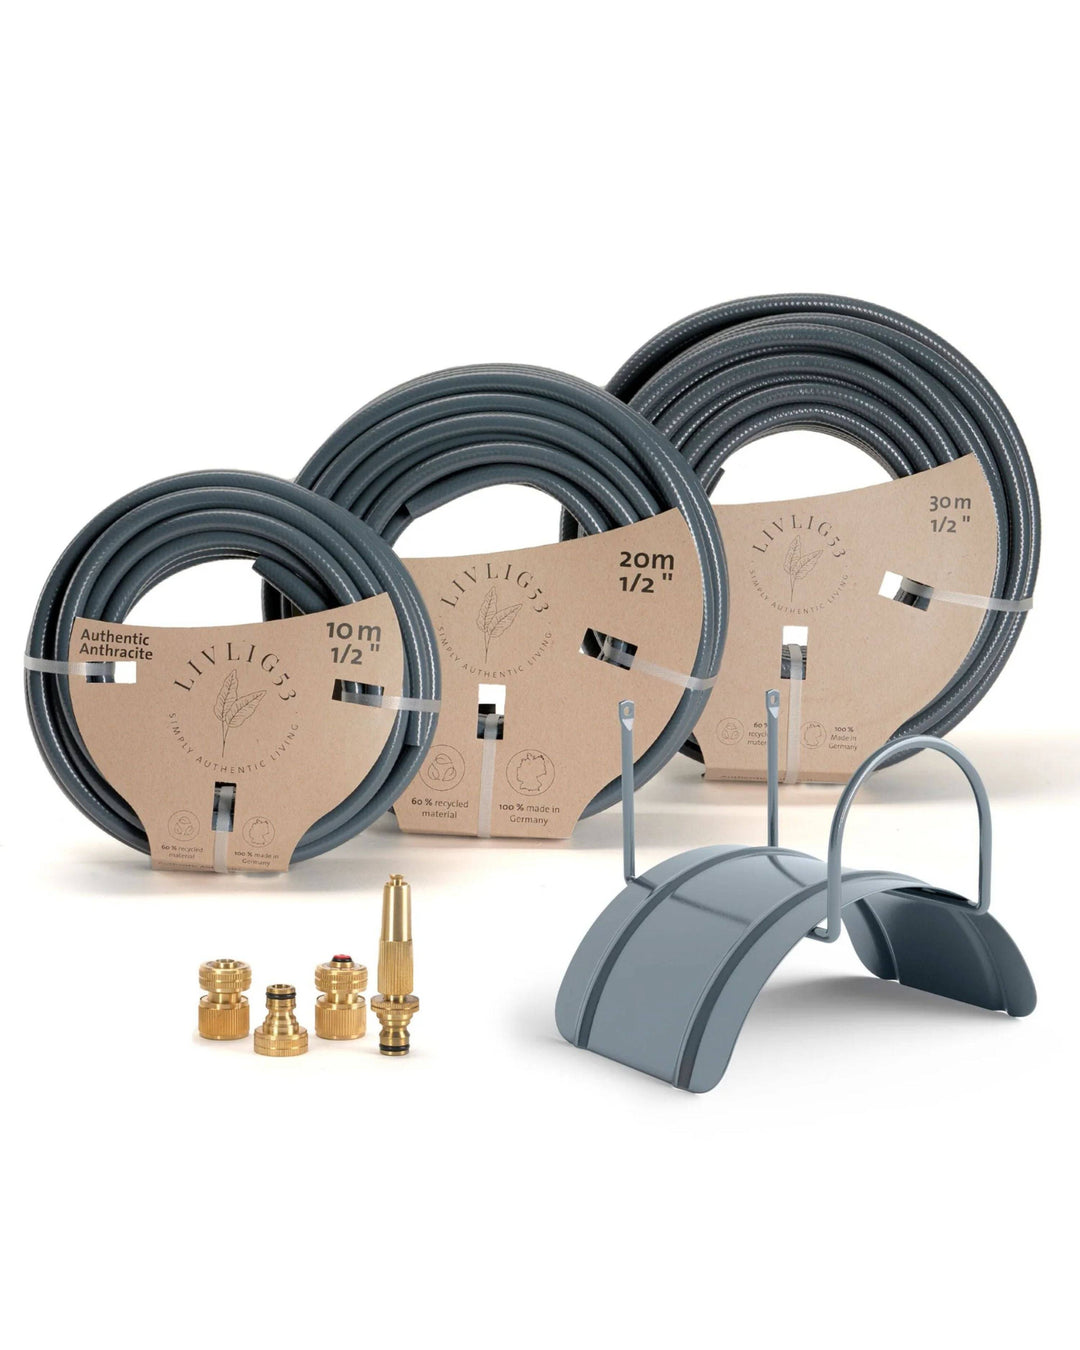 Livlig53 garden hose Authentic Anthracite in a set, wall bracket